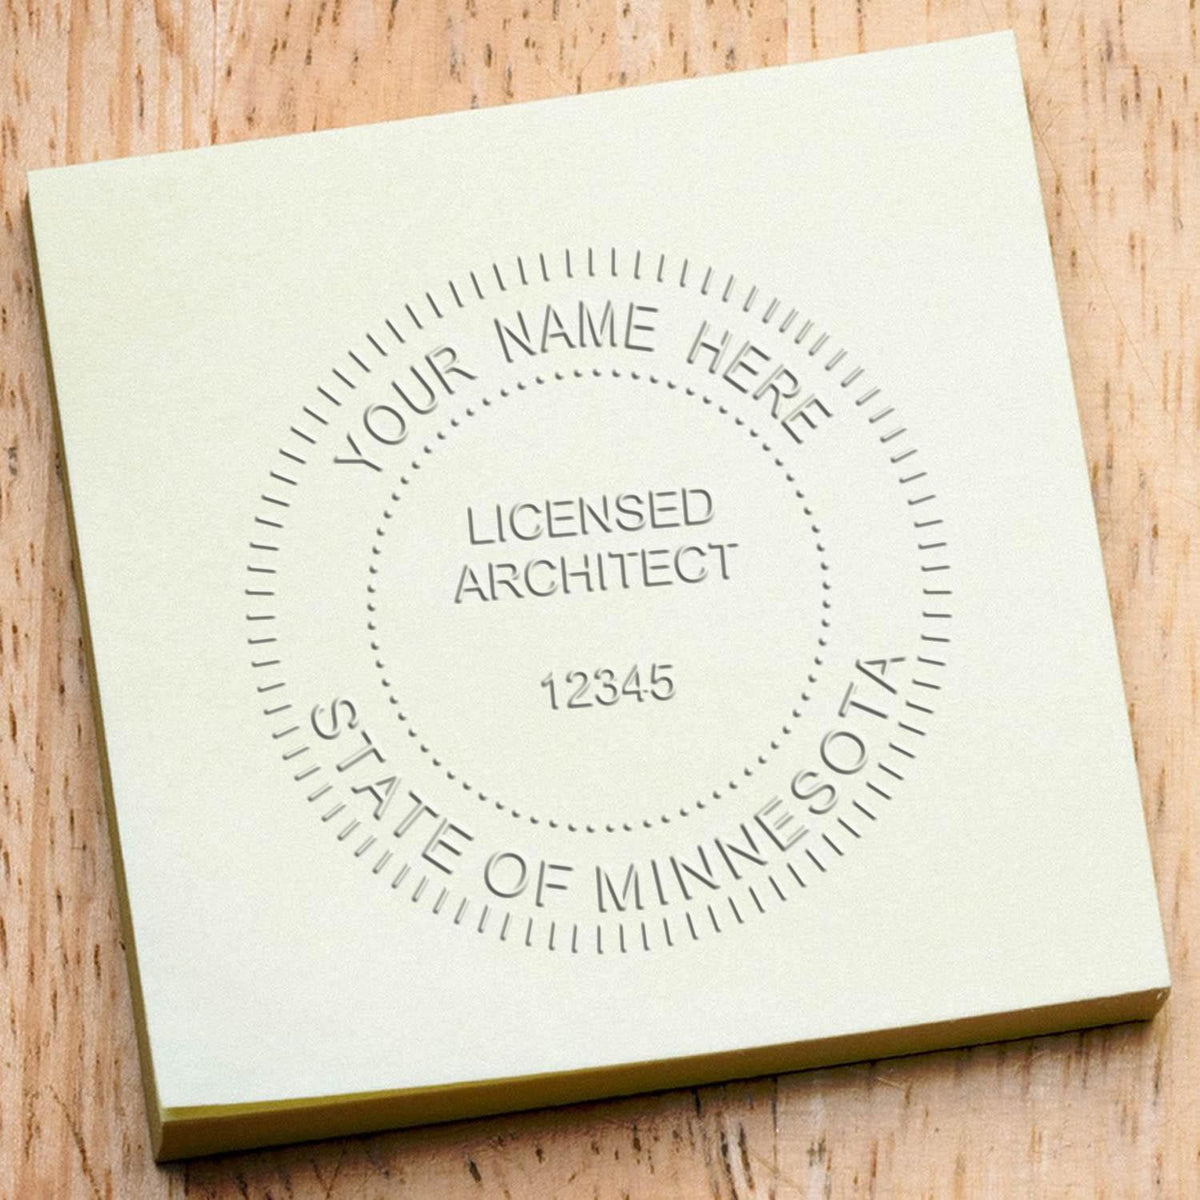 This paper is stamped with a sample imprint of the Extended Long Reach Minnesota Architect Seal Embosser, signifying its quality and reliability.